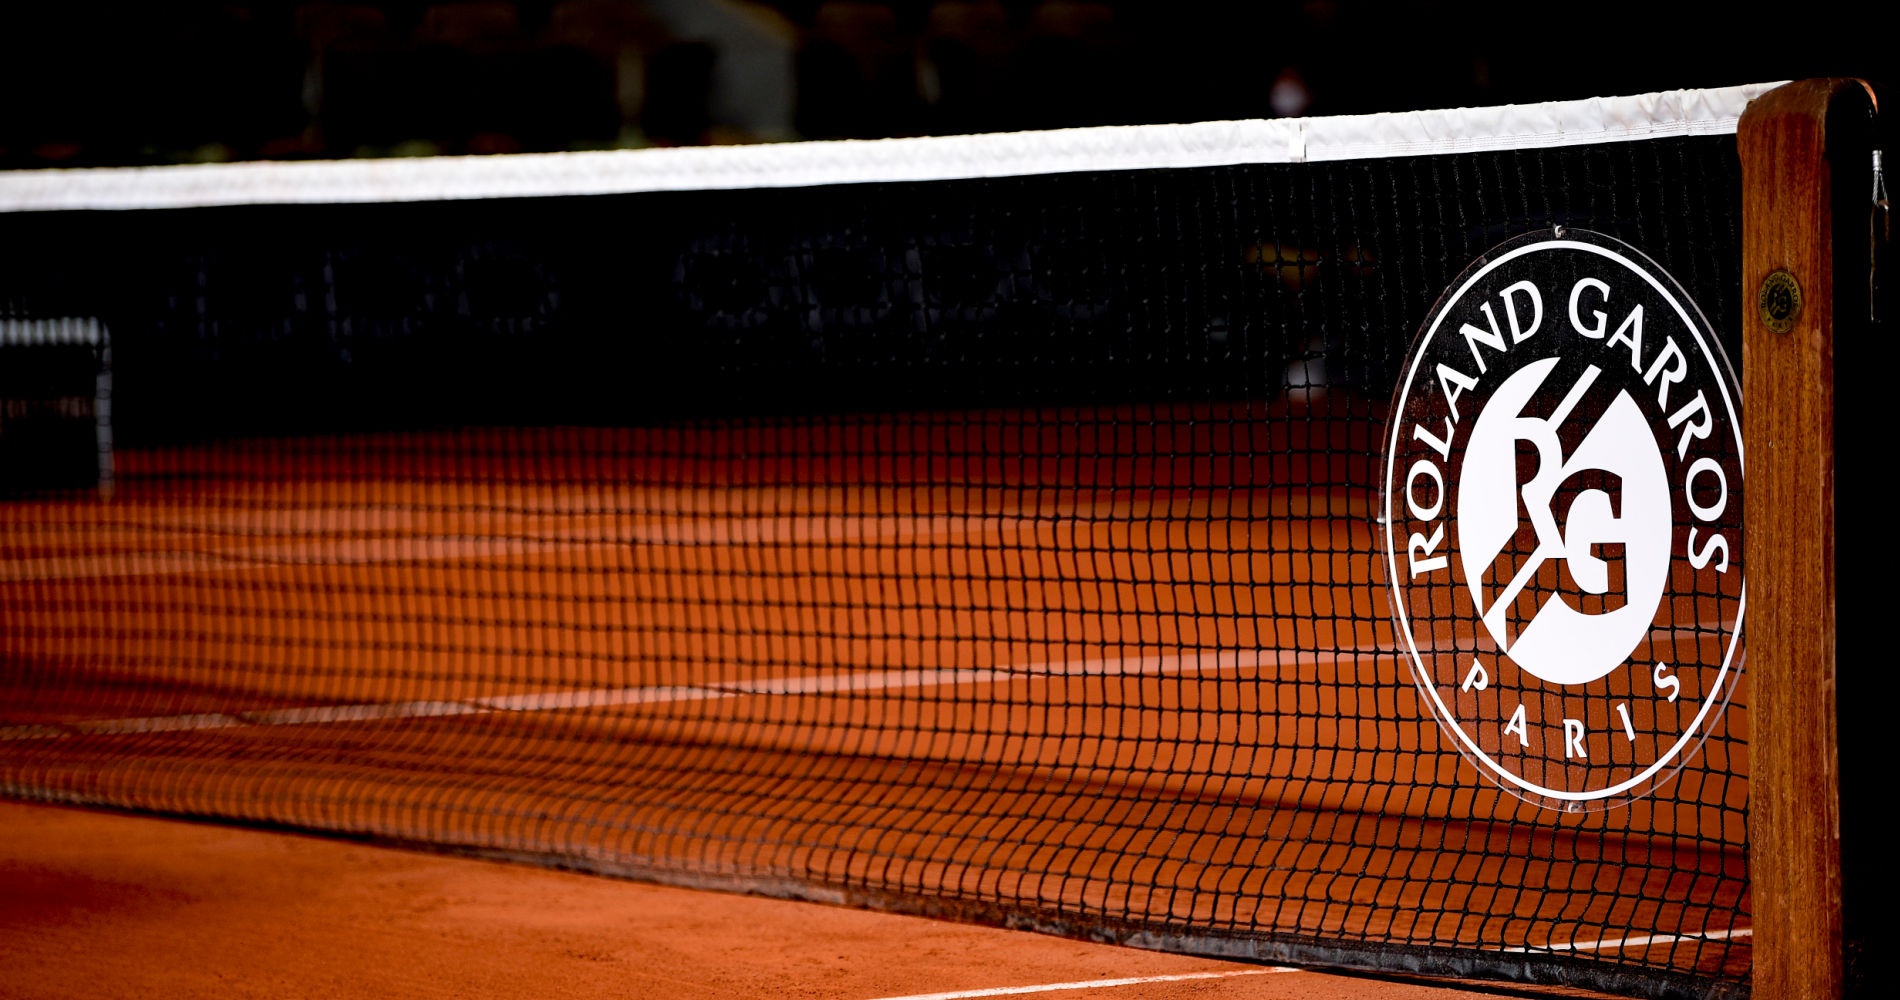 2022 French Open: What we learned from the men's draw - VAVEL USA